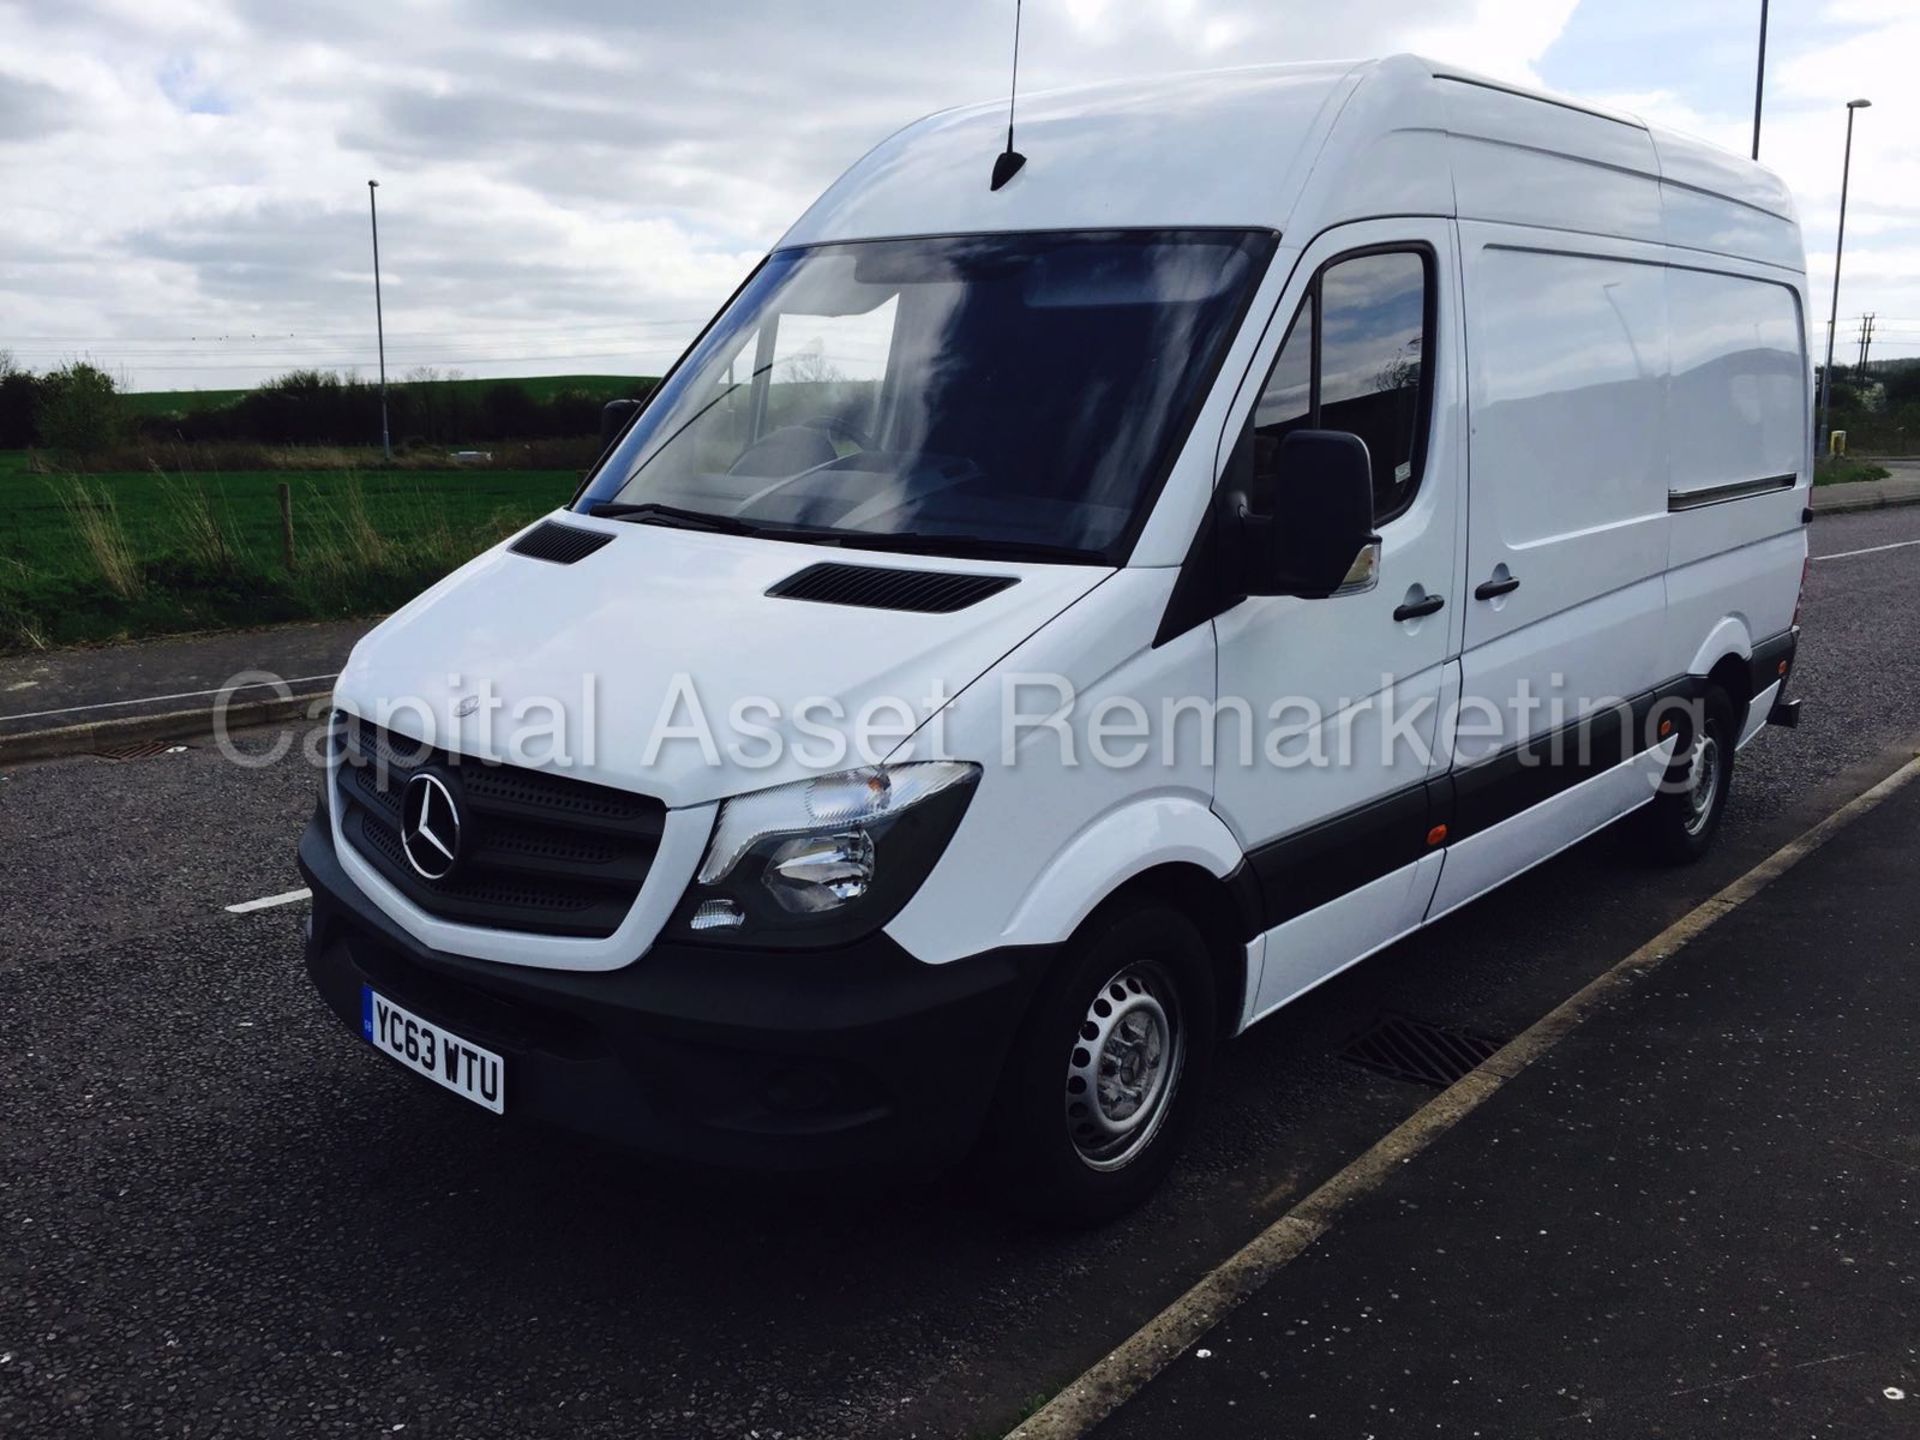 MERCEDES SPRINTER 313CDI "130BHP - 6 SPEED" FACELIFT MODEL / NEW SHAPE (2014 YEAR) 1 OWNER - Image 3 of 11